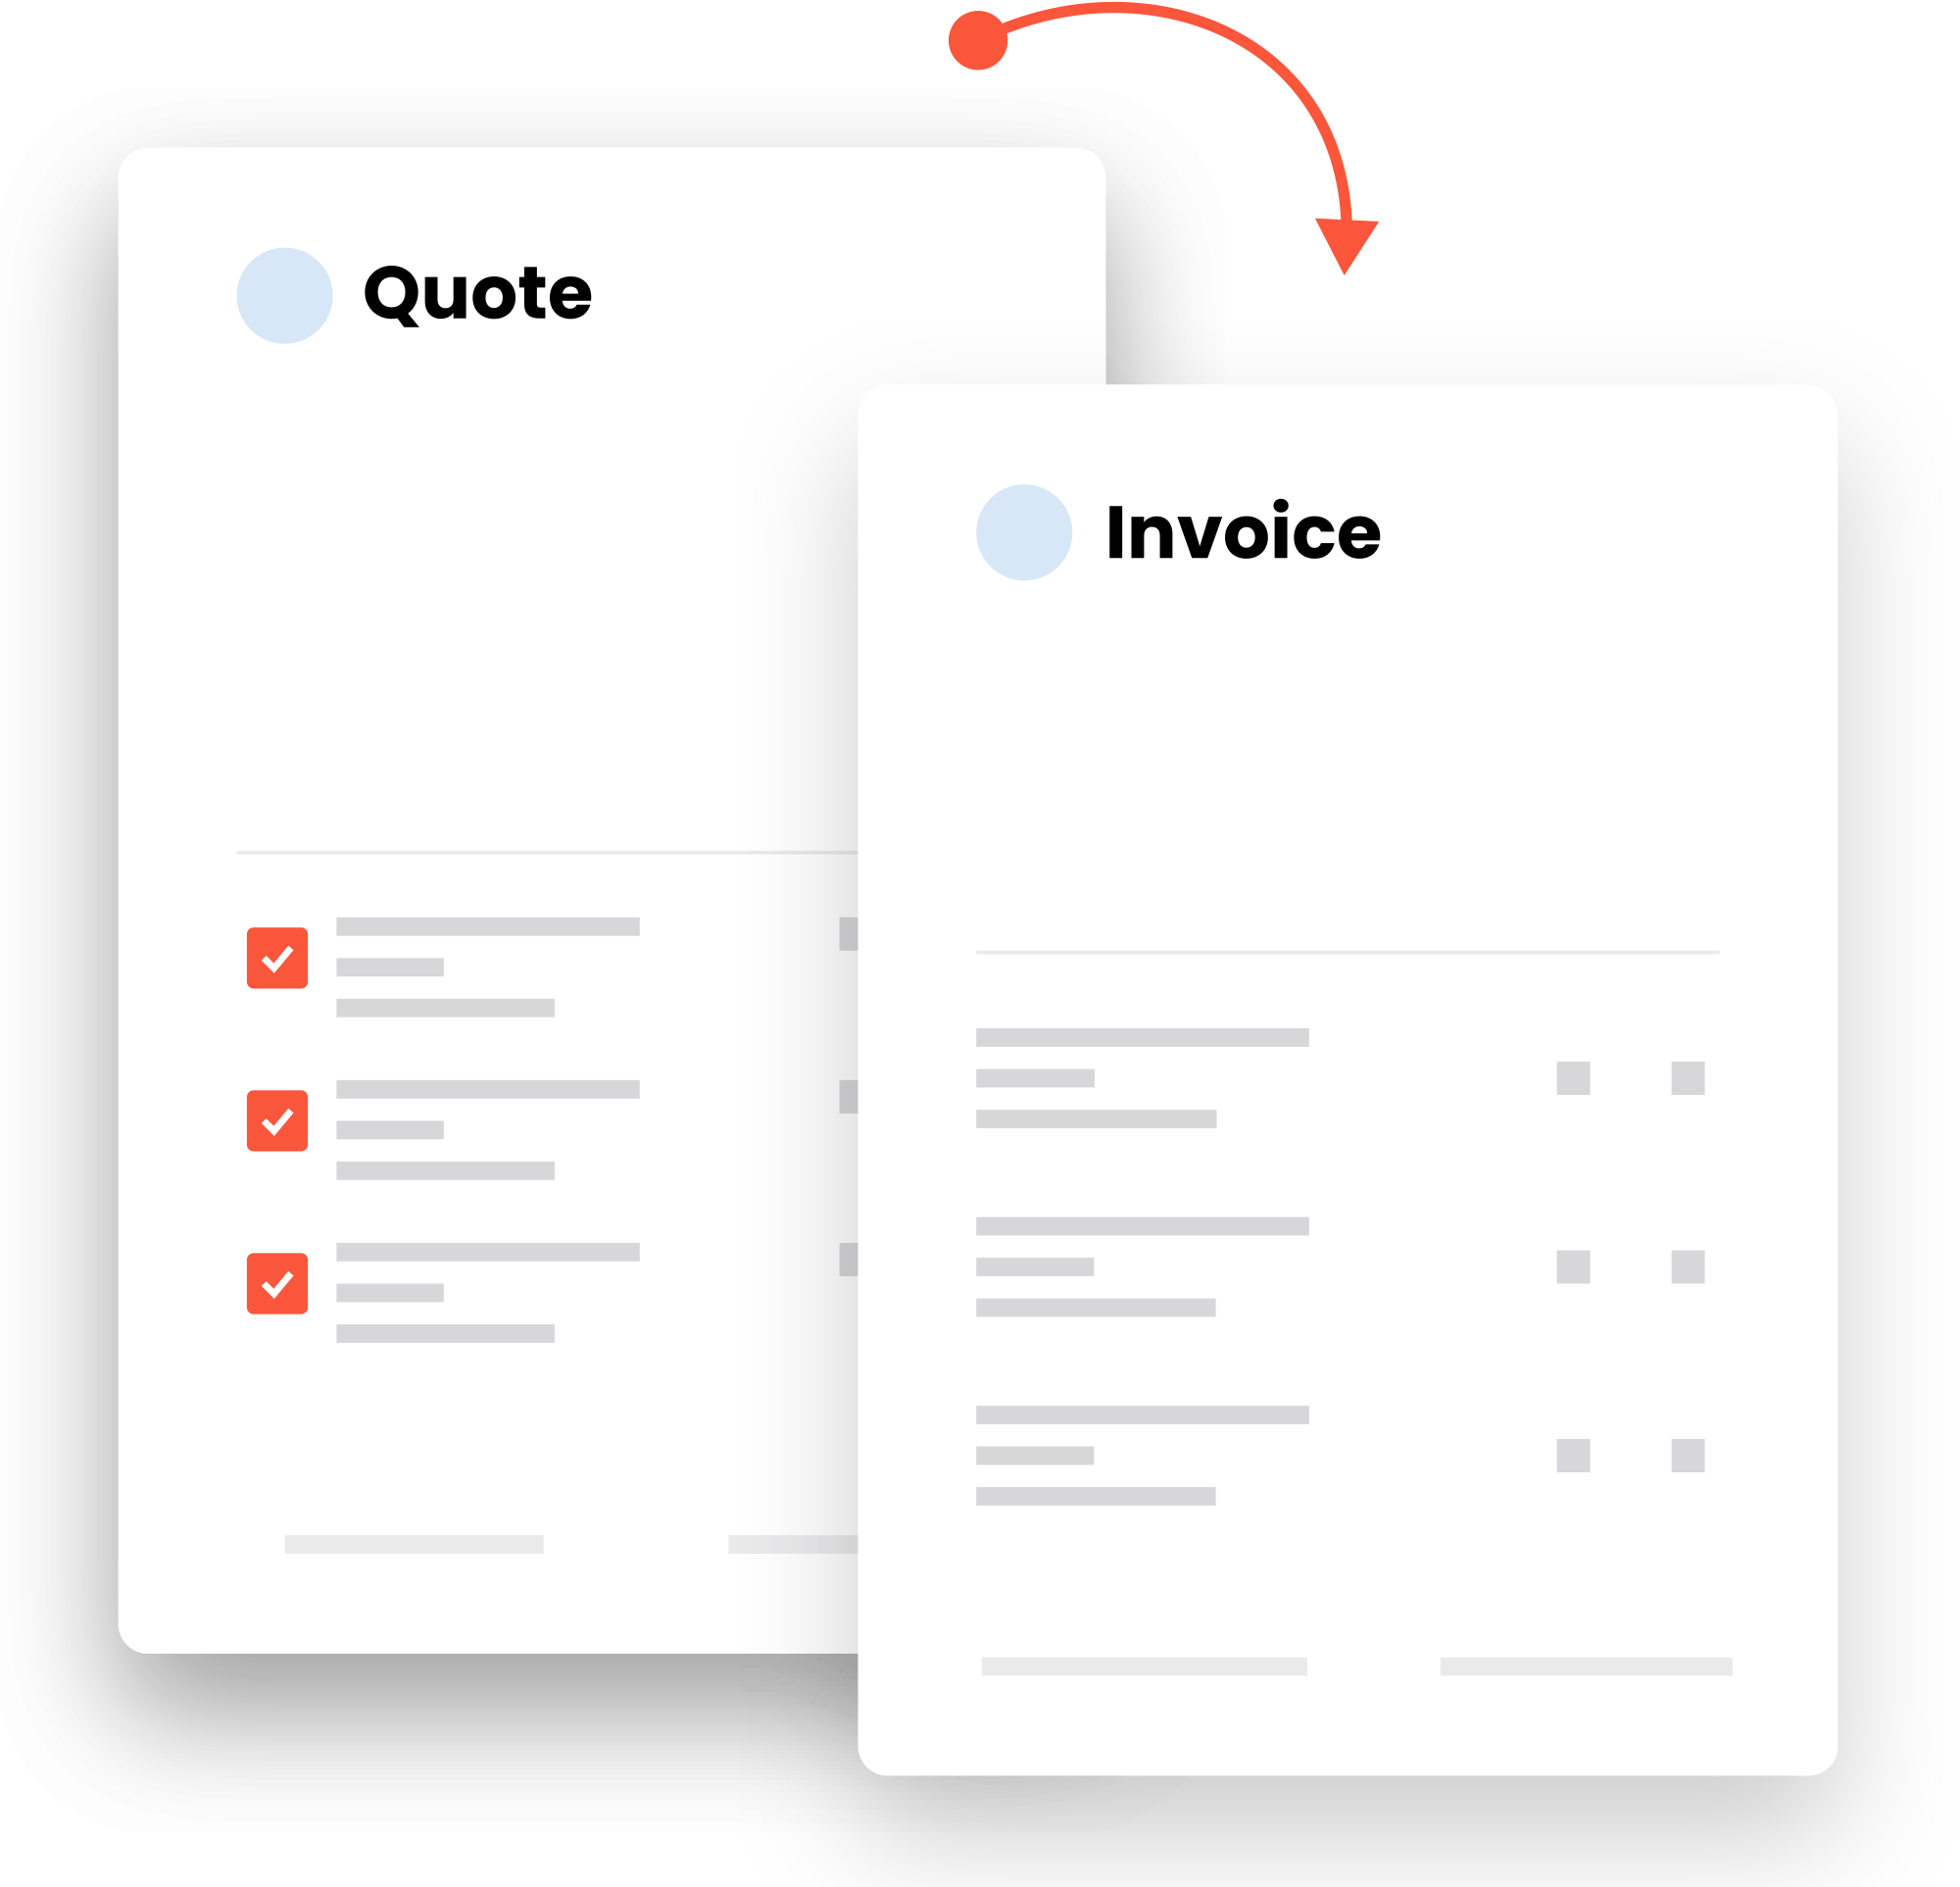 Invoice Software - Turn quotes into invoices